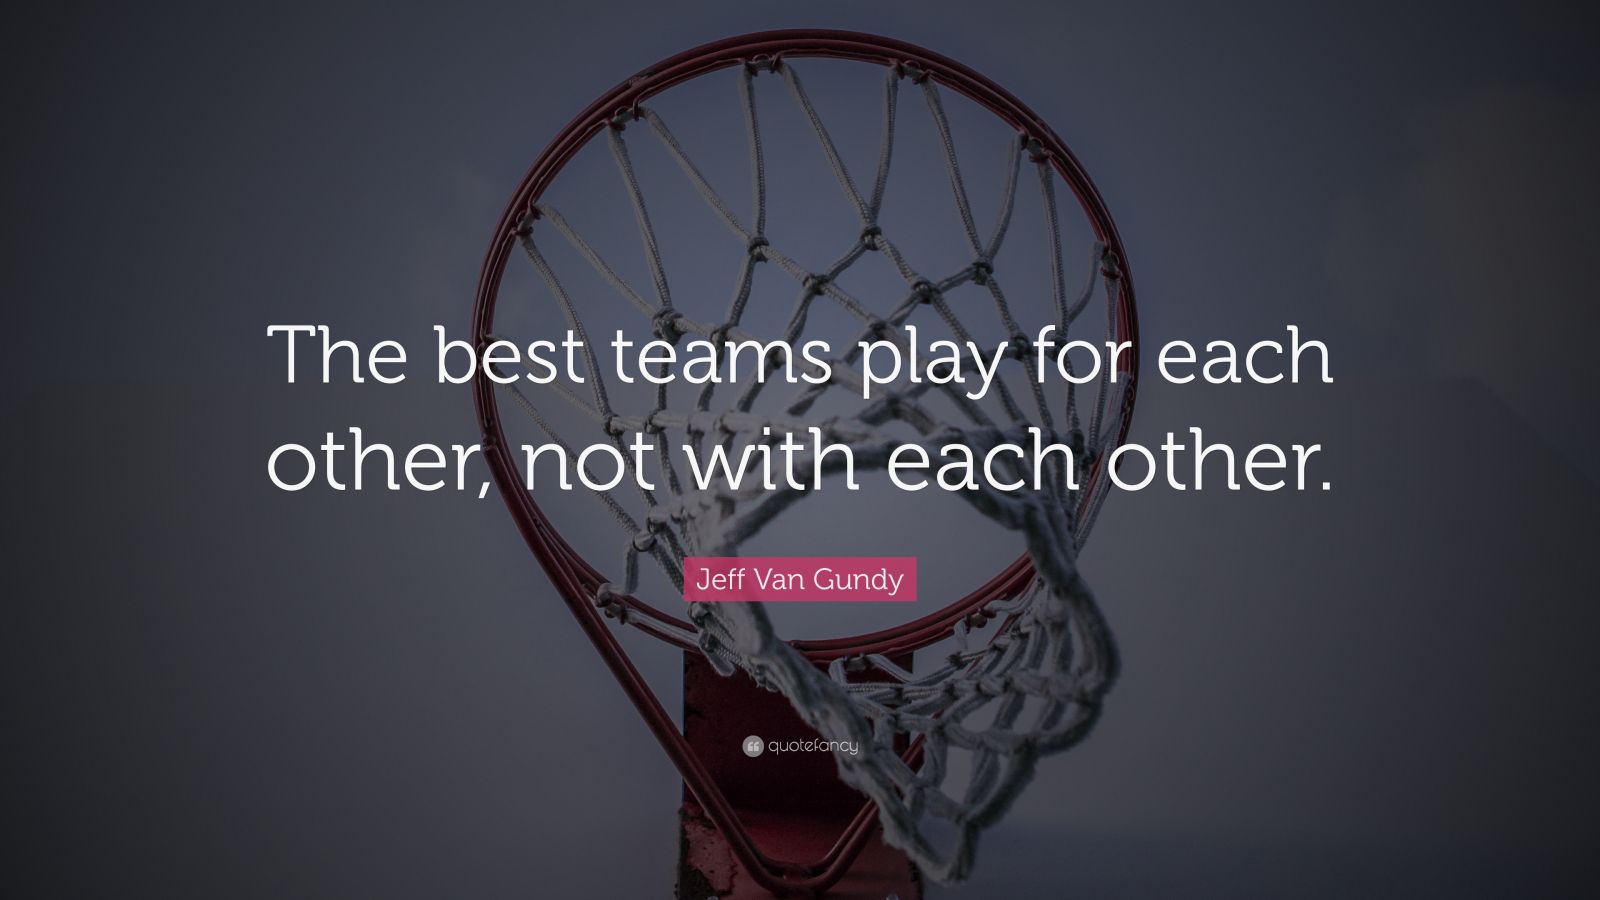 Jeff Van Gundy Quote: “The best teams play for each other, not ...